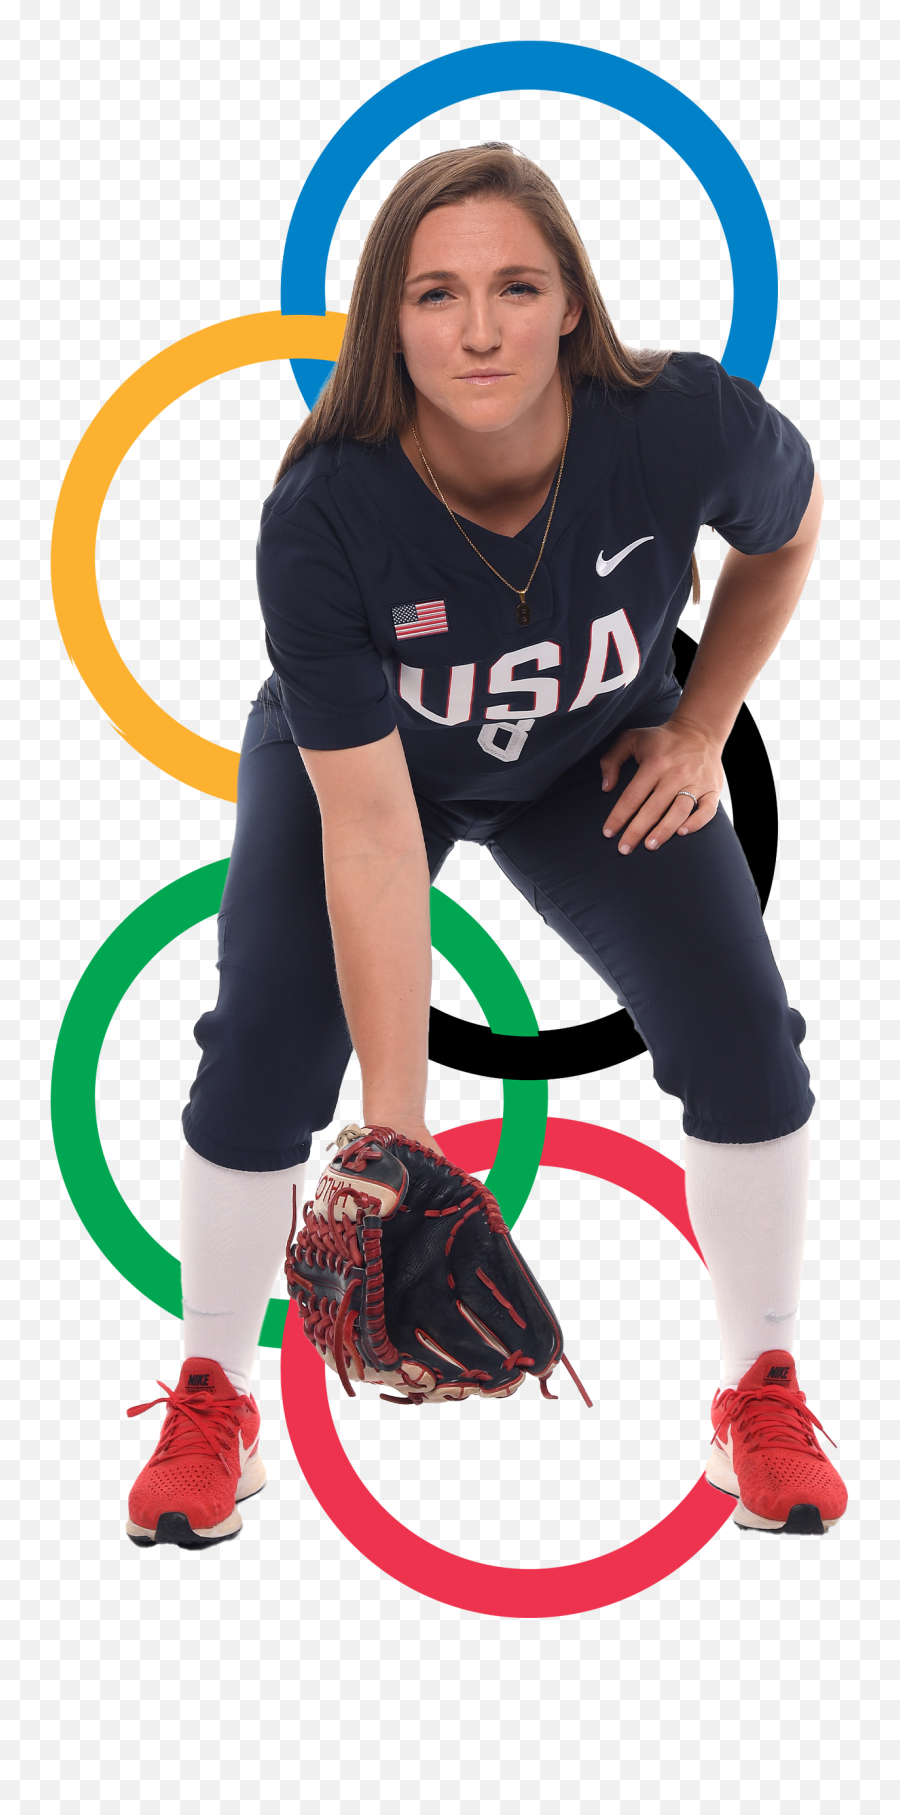 22 Lgbtq Olympic Athletes To Cheer For - For Women Emoji,Press Conference Baseball Emotion